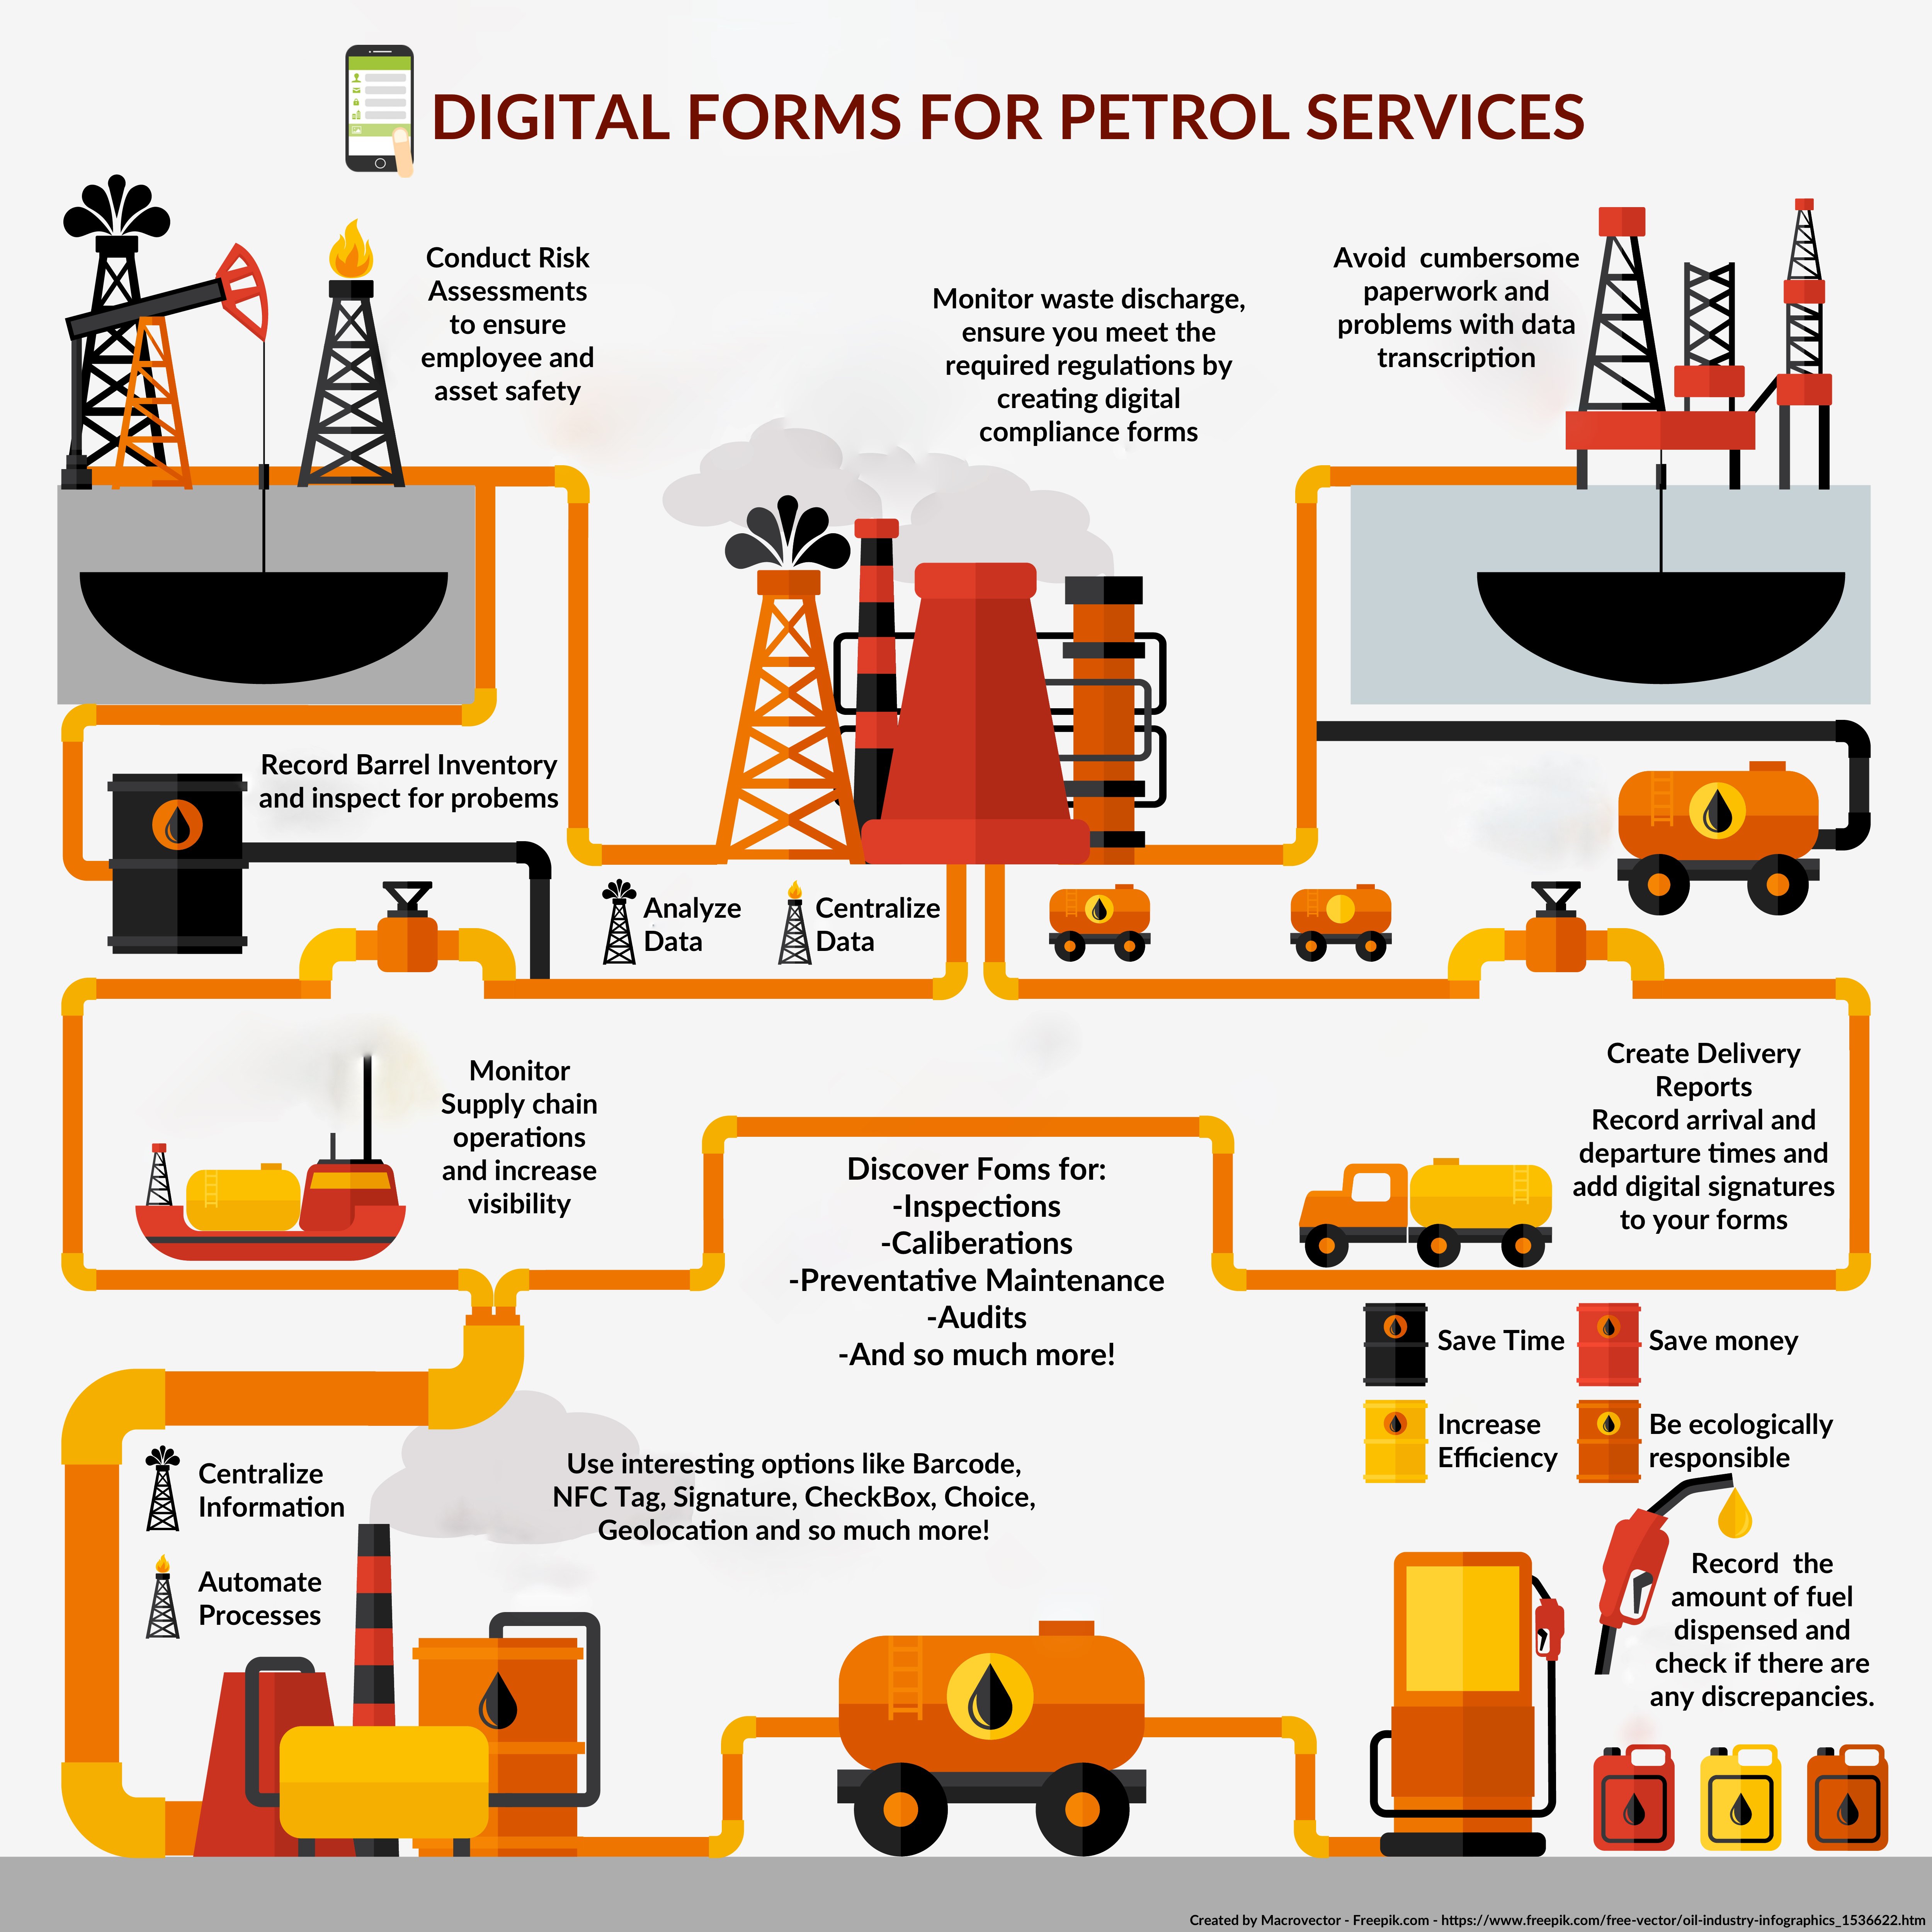 Digital Forms for Petrol Services